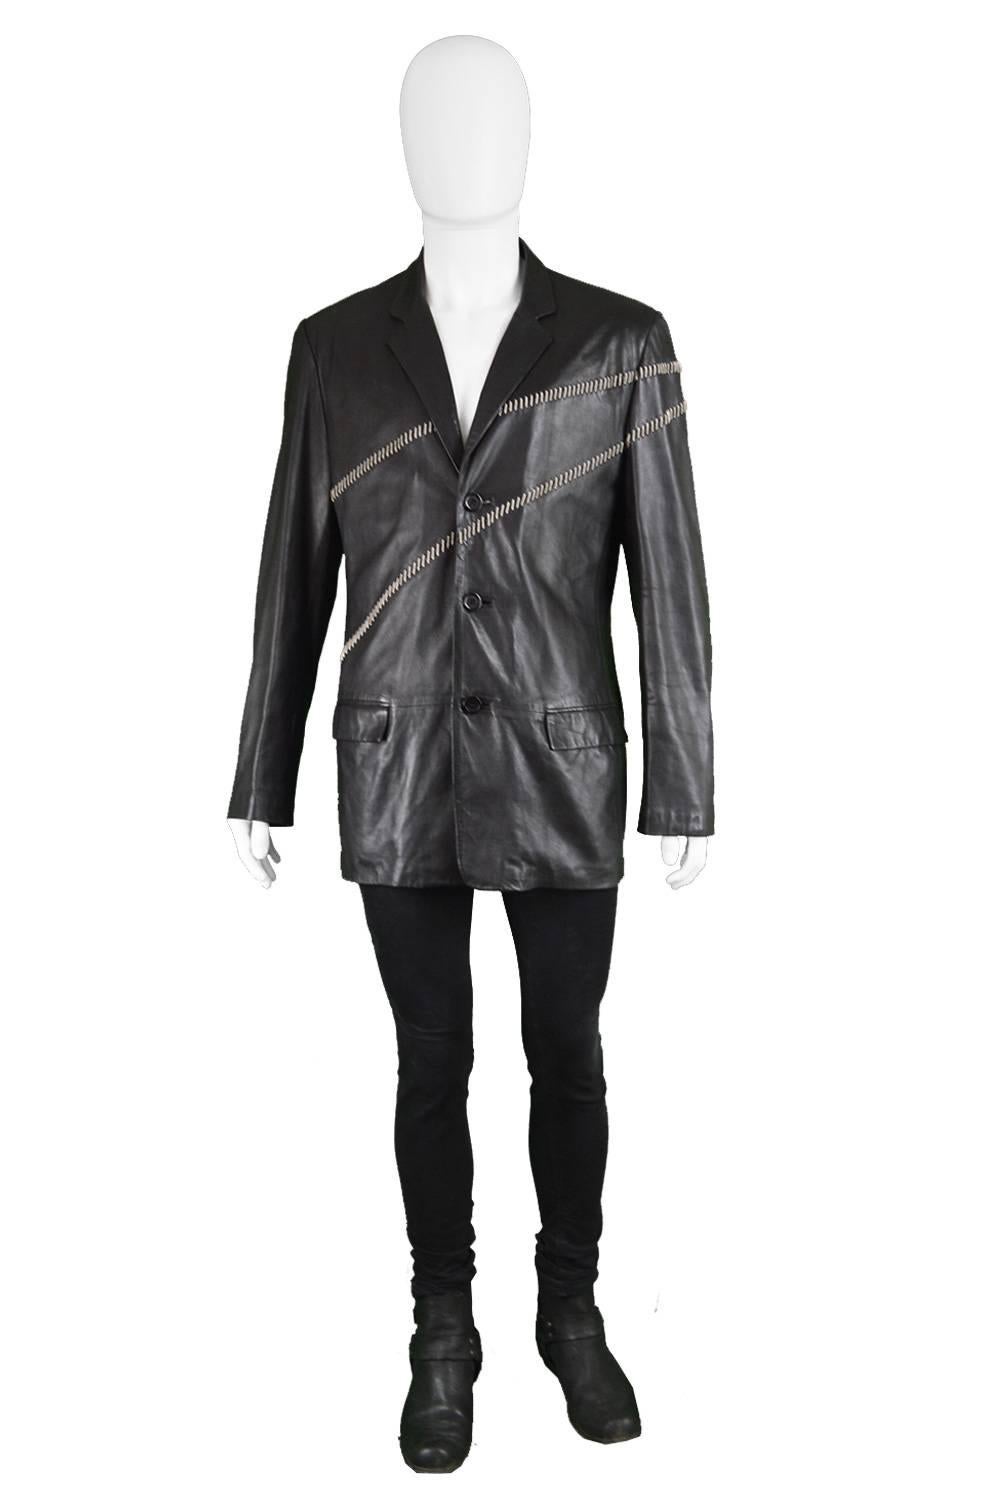 Gianni Versace Vintage Men's Leather Chain Embroidered Blazer Jacket, 1990s

Size: Marked EU 50 which is roughly a men's Medium. Please check measurements.
Chest - 42” / 106cm (allow a couple of inches room for movement)
Waist - 38” / 96cm
Length